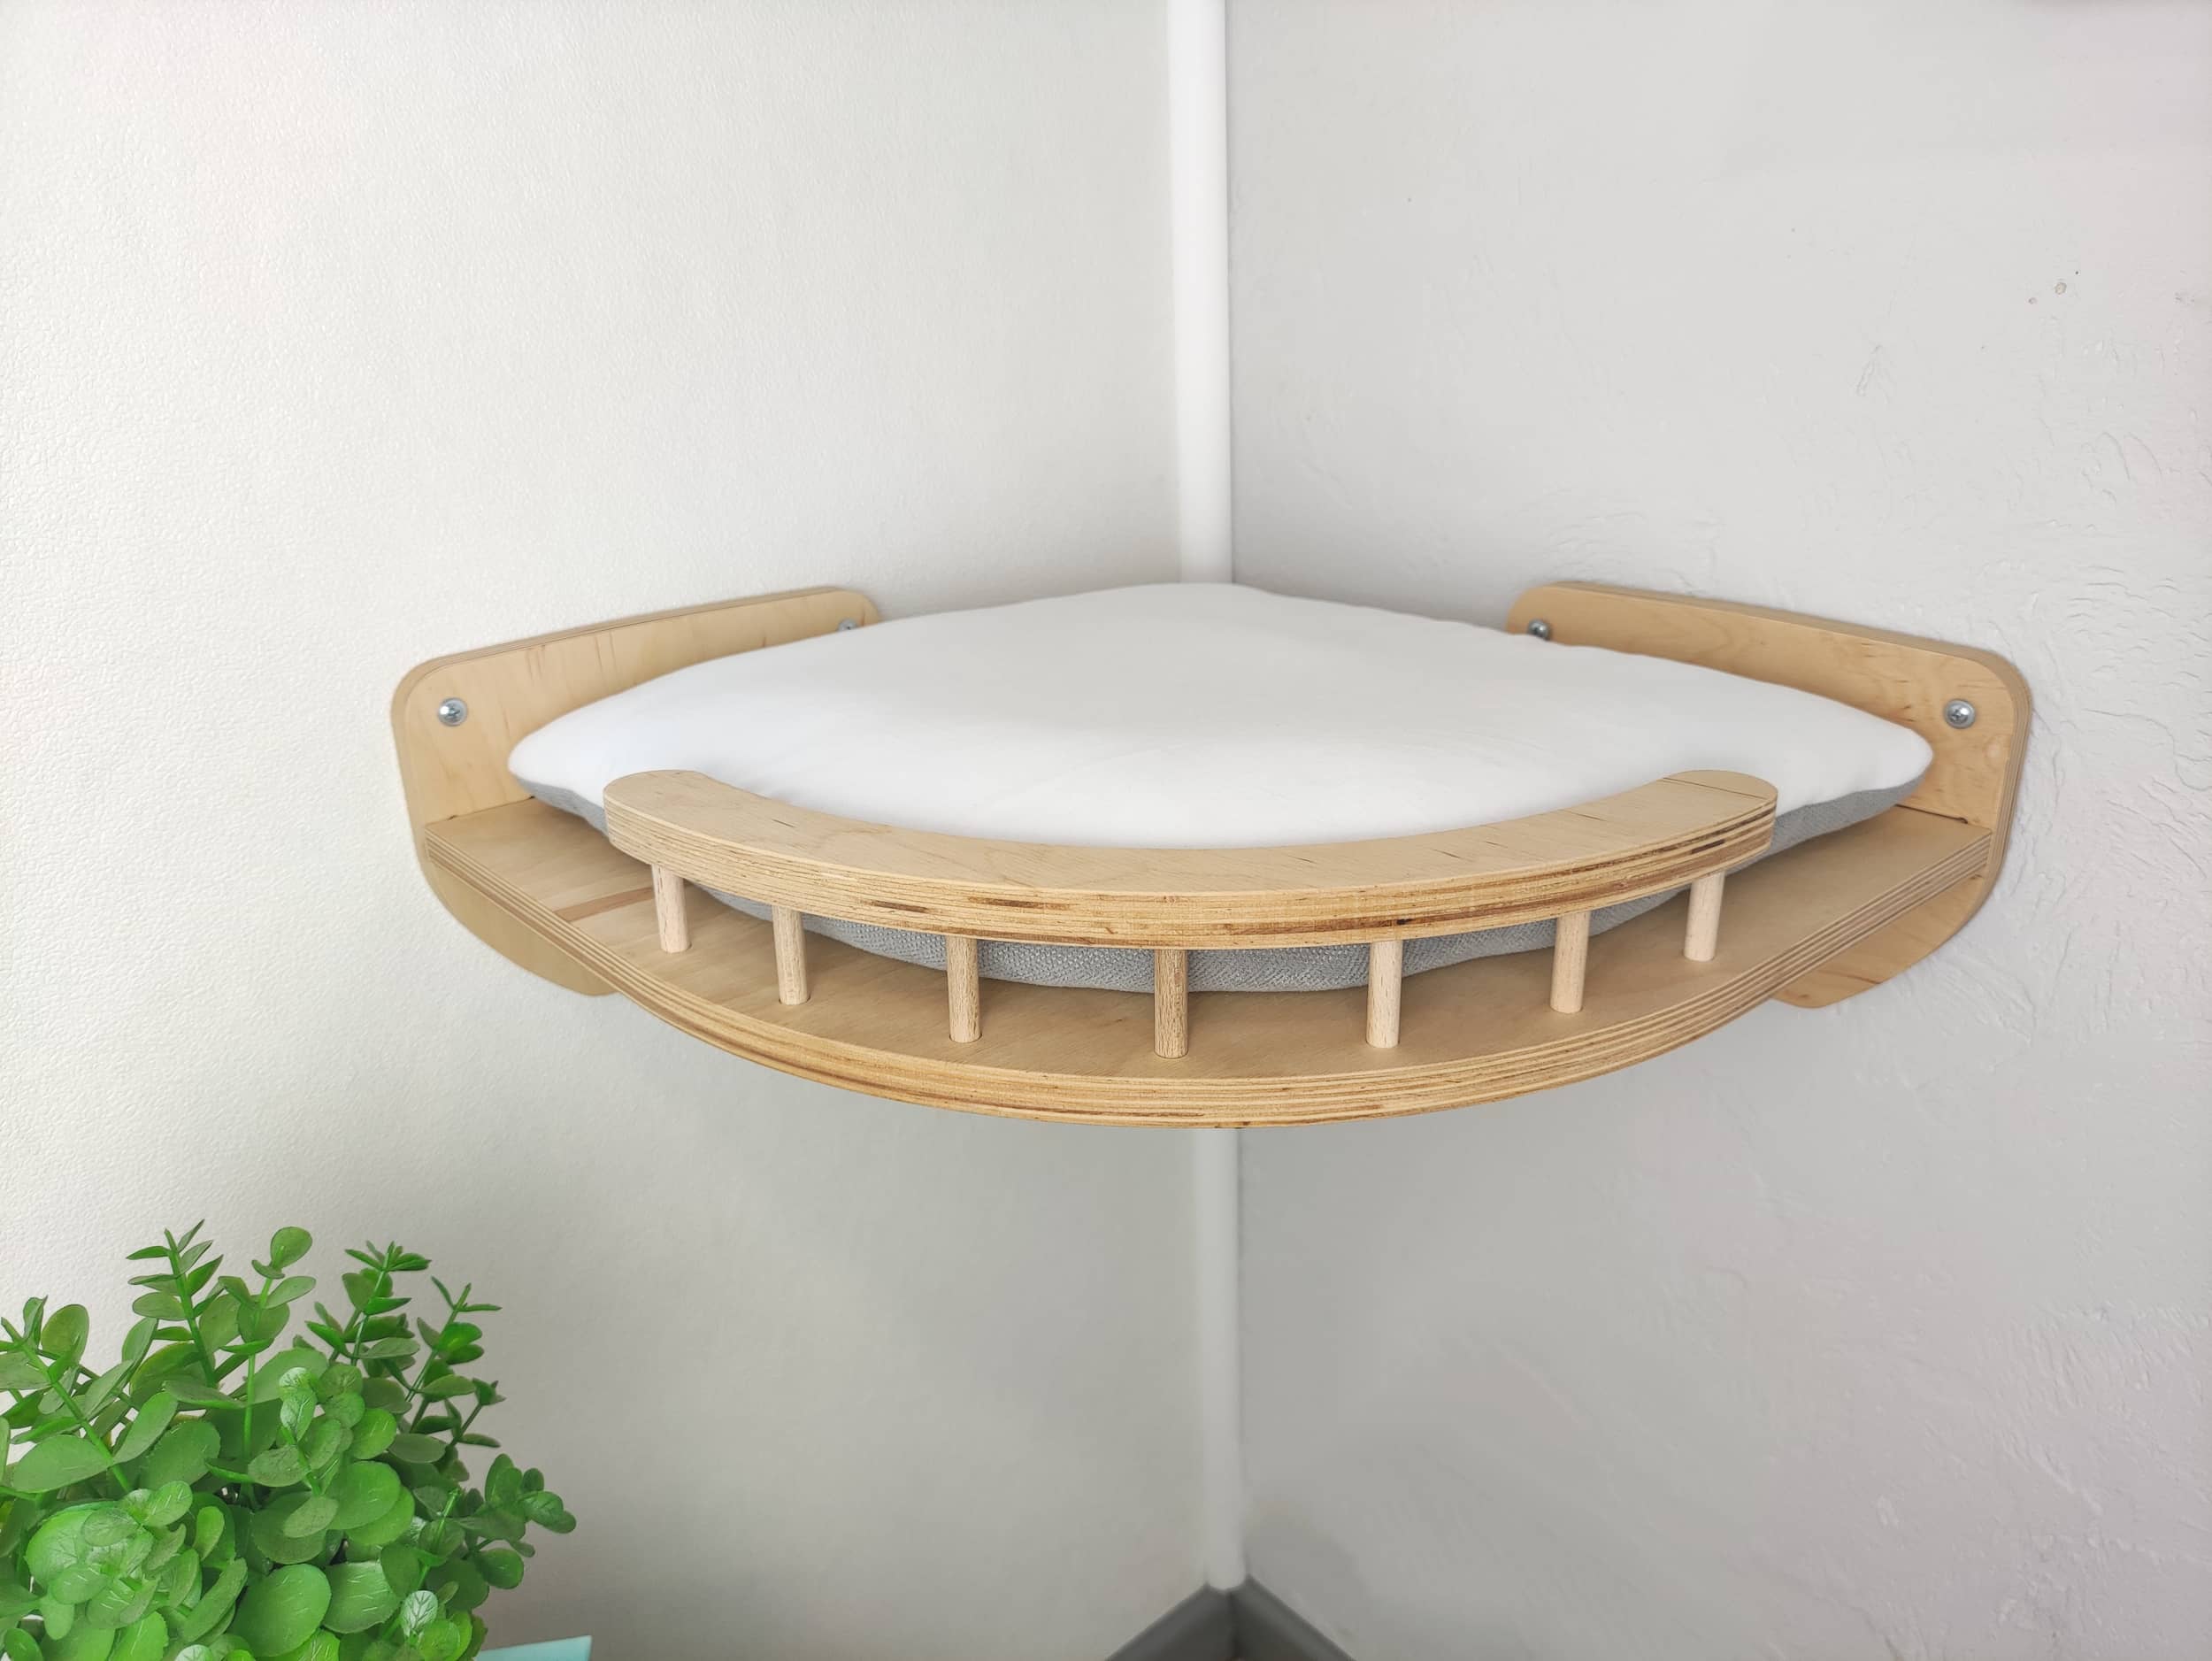 Wall-mounted corner cat shelf made of plywood with soft cushion, light wood color